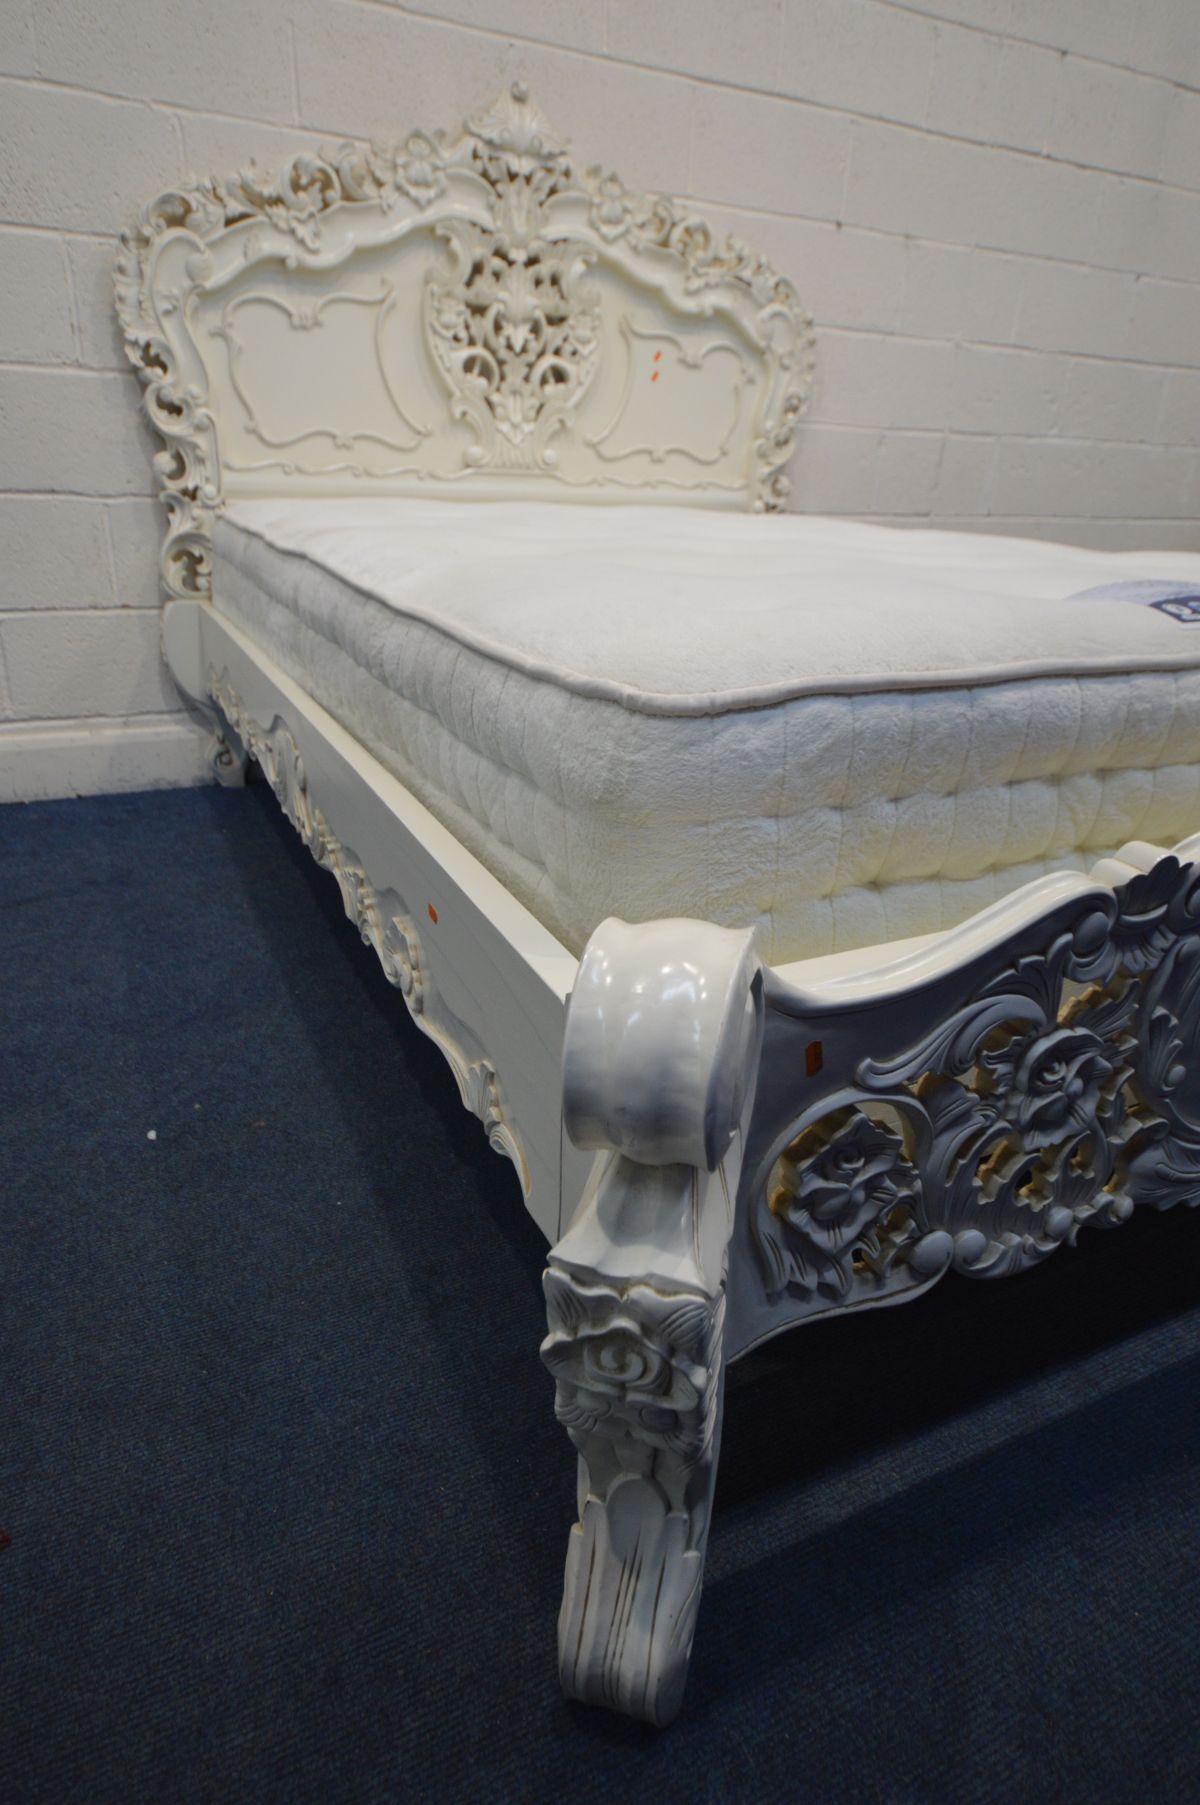 A LATE 20TH CENTURY CREAM PAINTED CONTINENTAL 4FT6 BEDSTEAD, with heavy ornate carved decoration, - Image 2 of 4